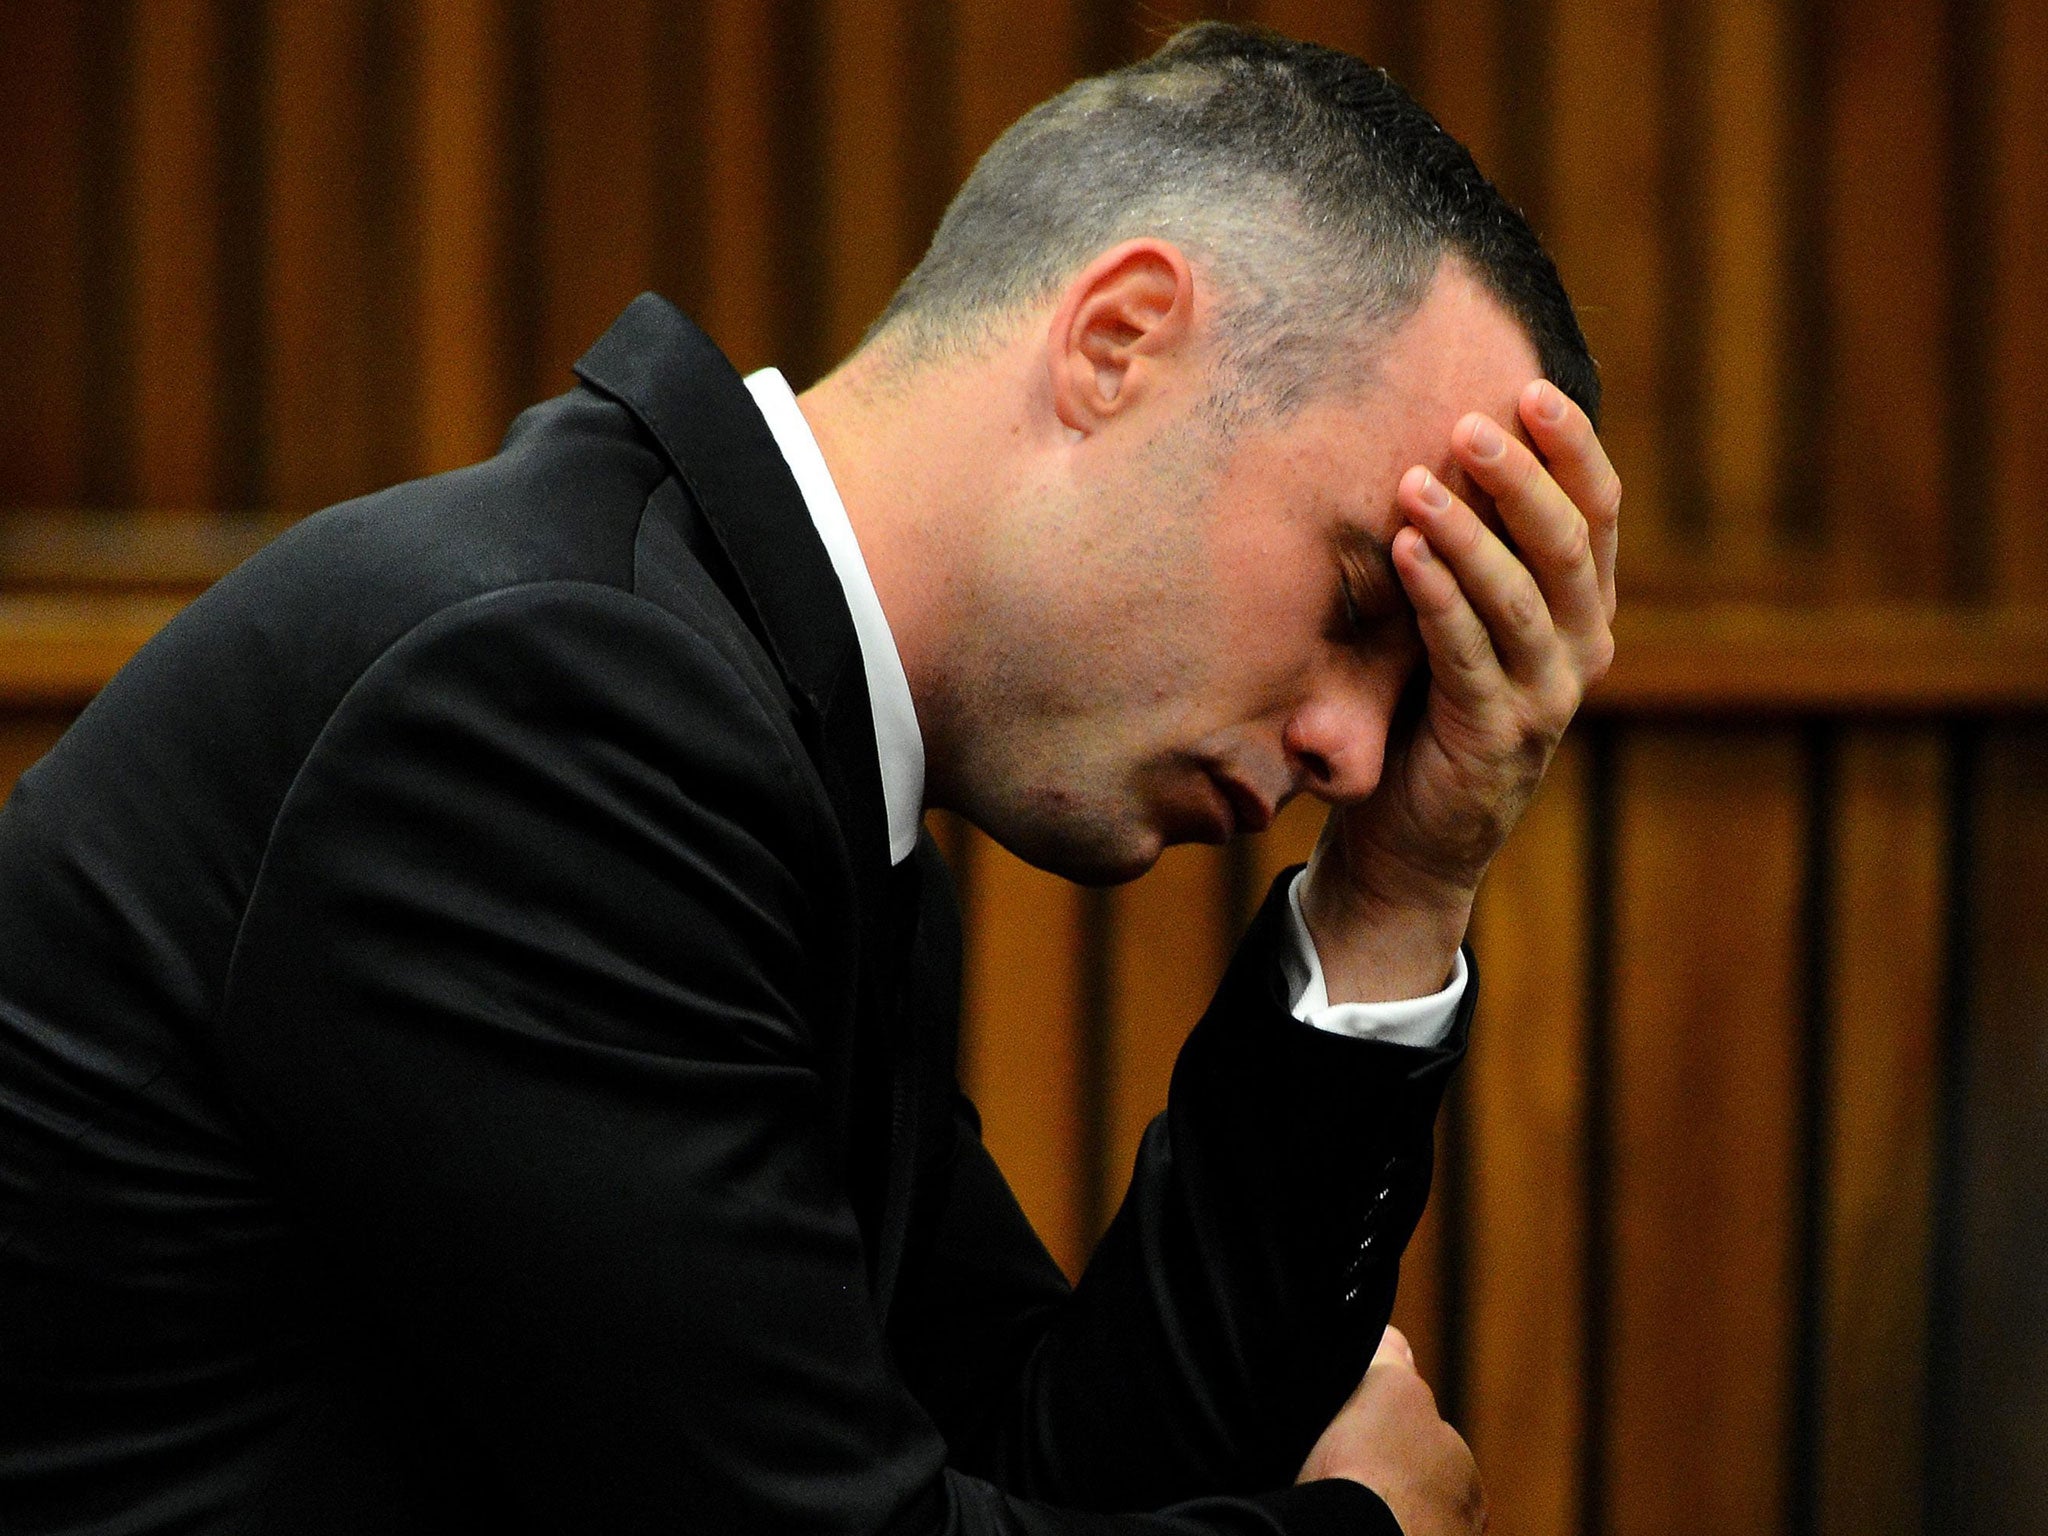 Oscar Pistorius holds his hand on his forehead in the dock at the high court in Pretoria